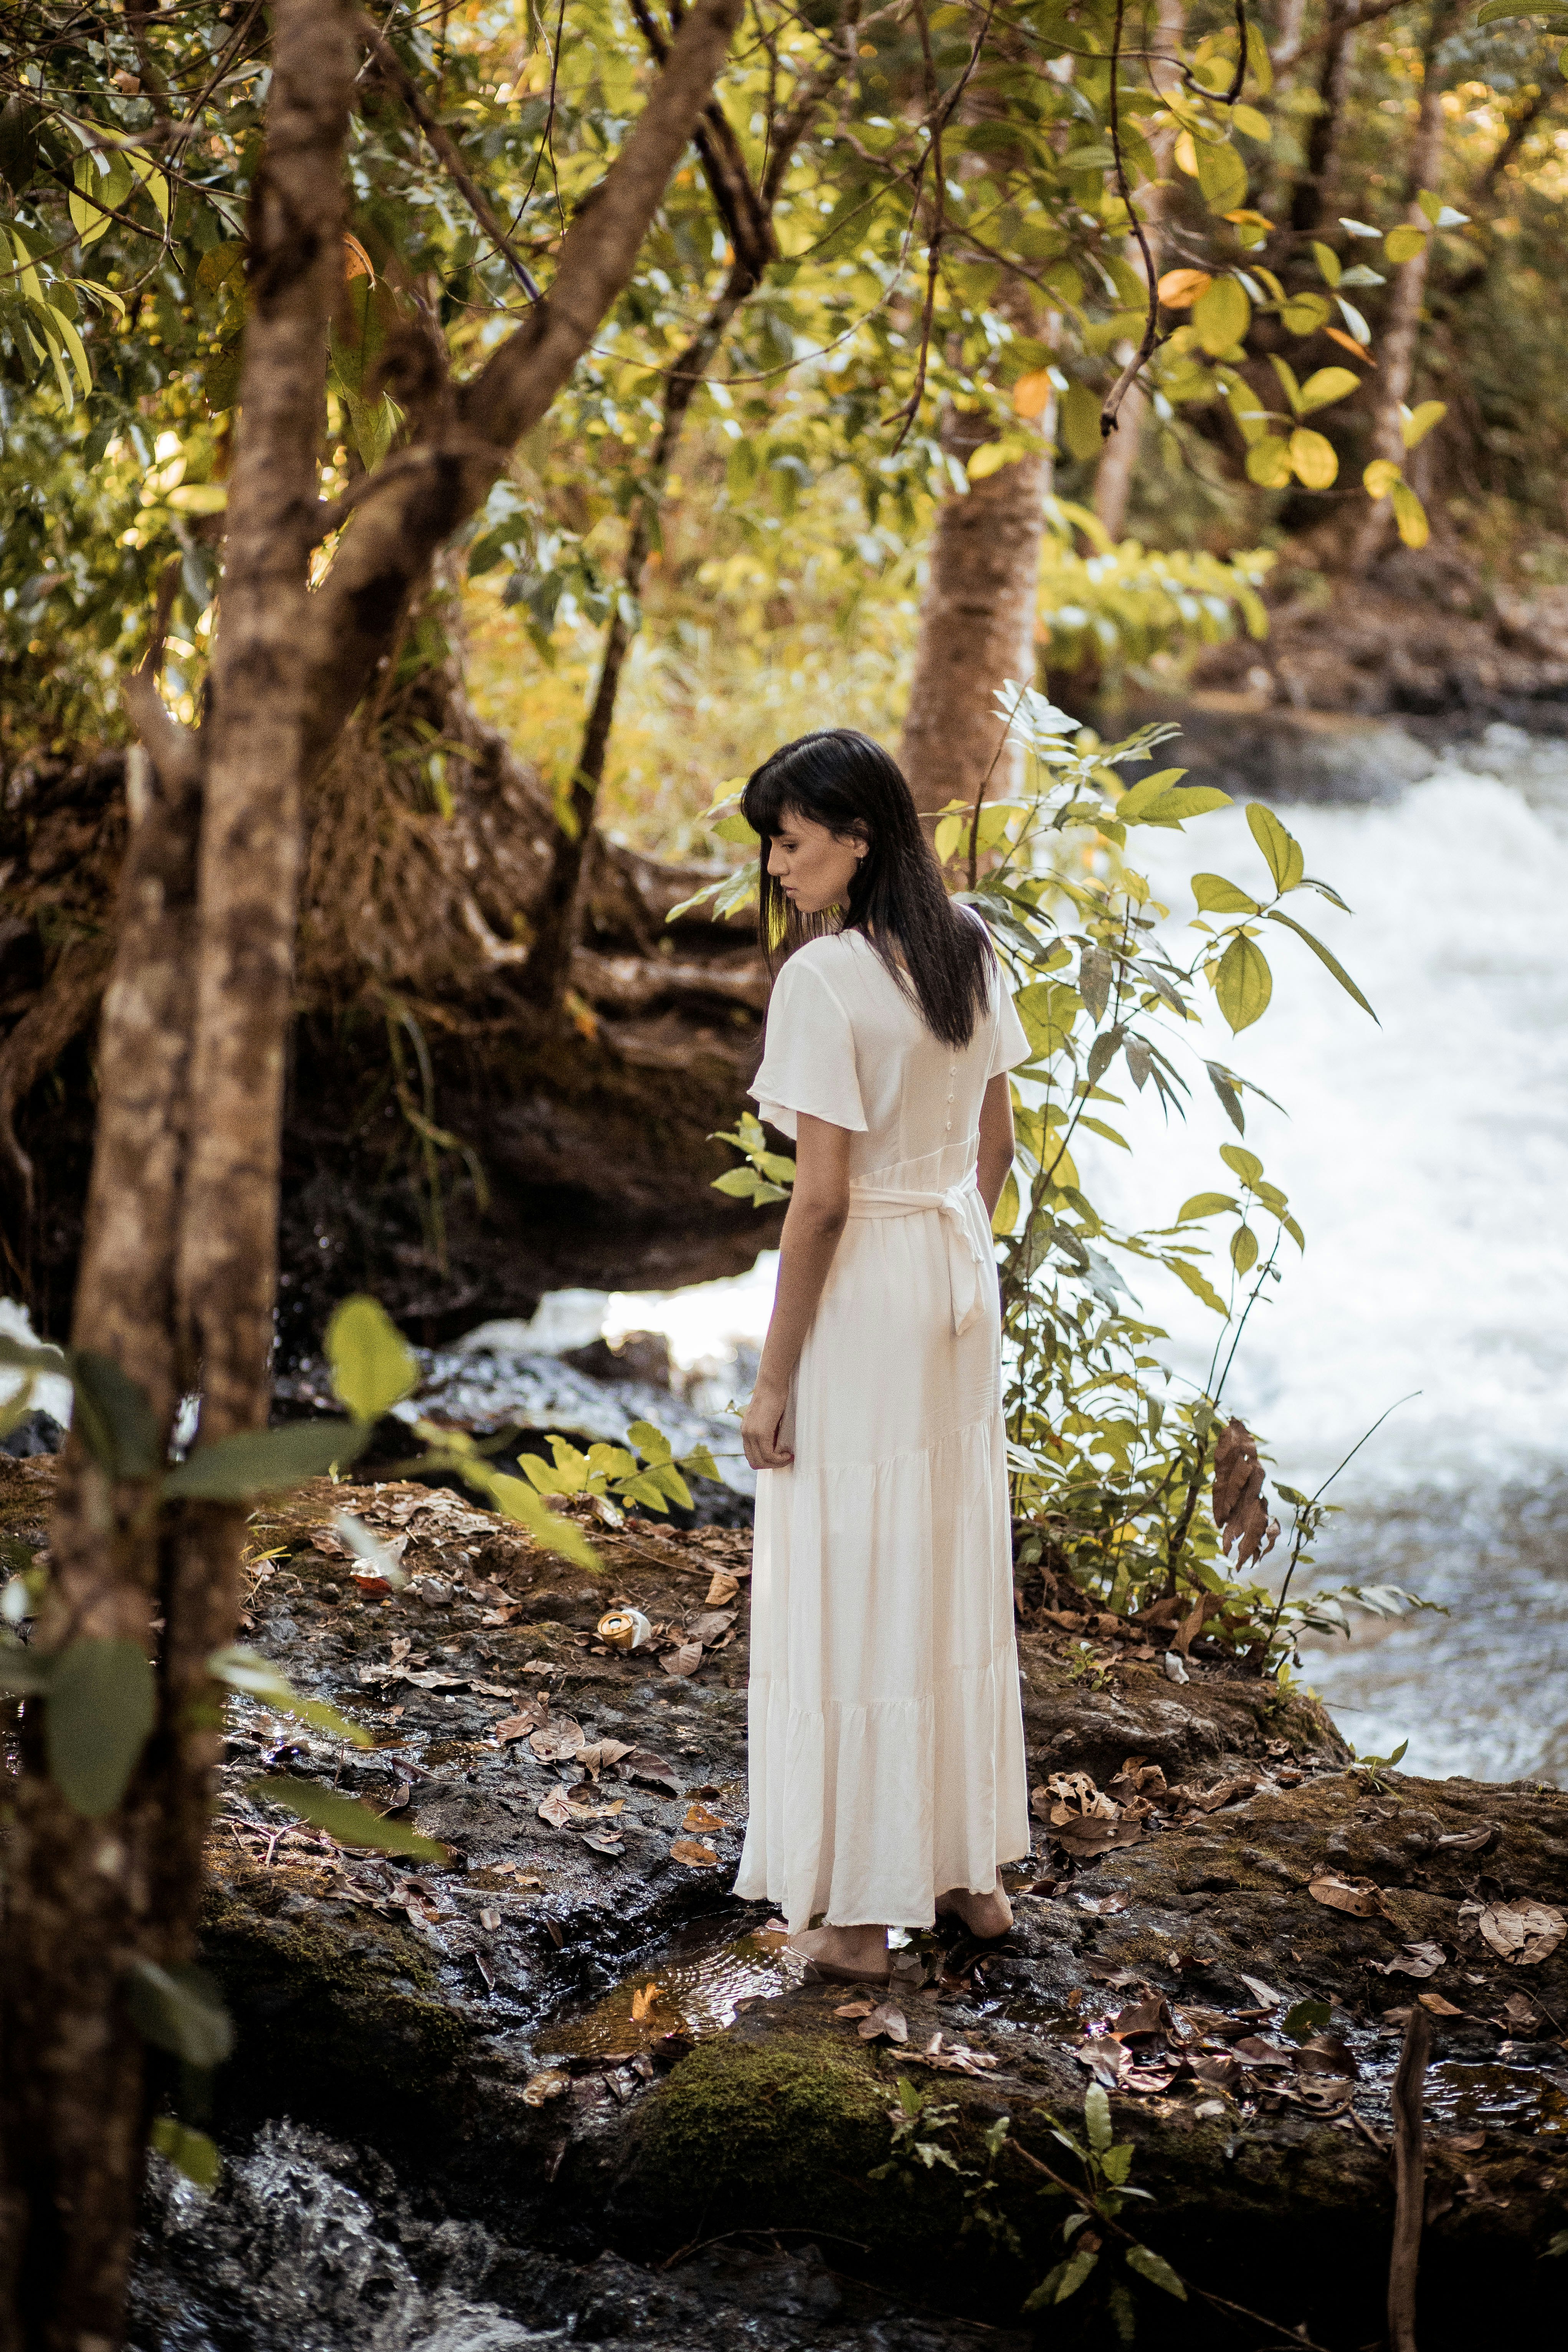 woman in white dress standing near body of water during daytime